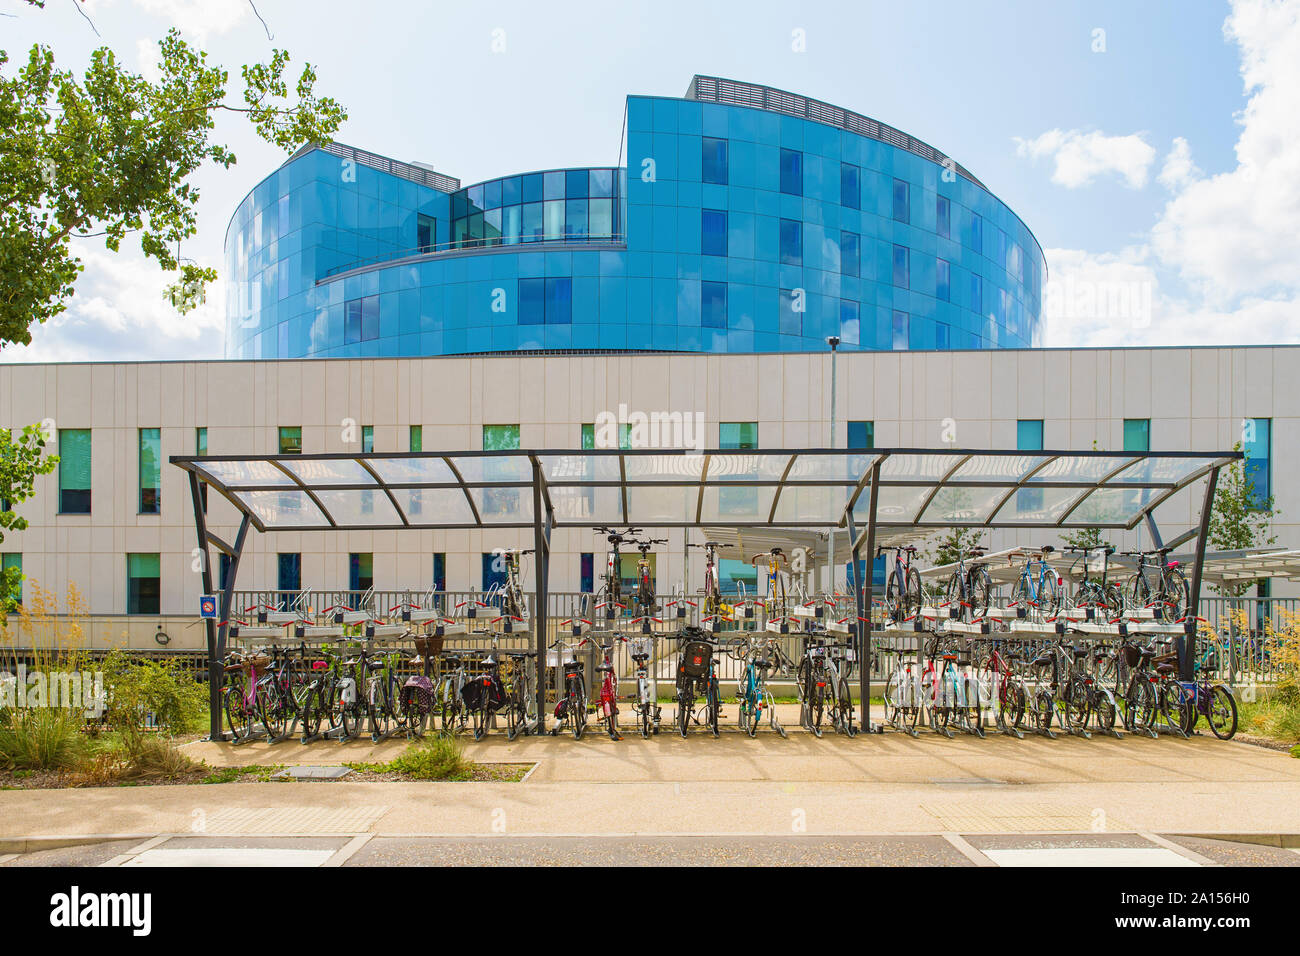 Bike storage at Royal Papworth Hospital which is a leading heart and lung hospital, located on the Cambridge Biomedical Campus Stock Photo